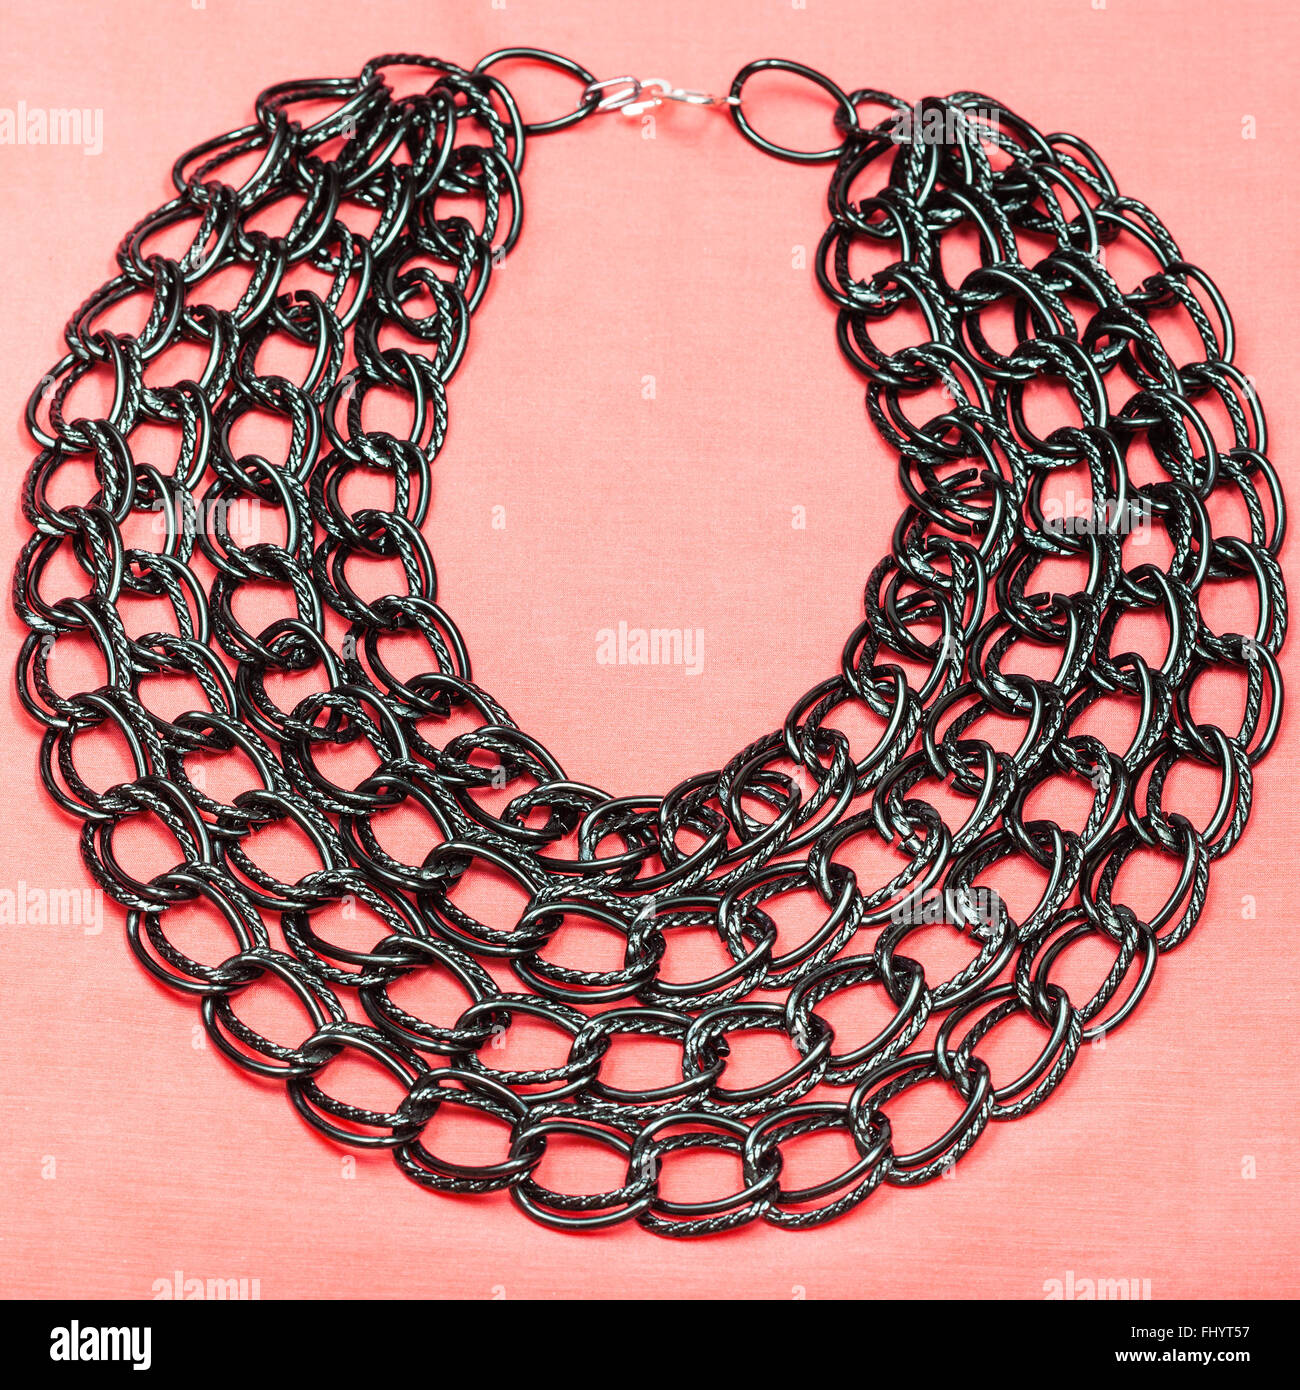 top view of necklace from strings of black chain on pink textile background Stock Photo